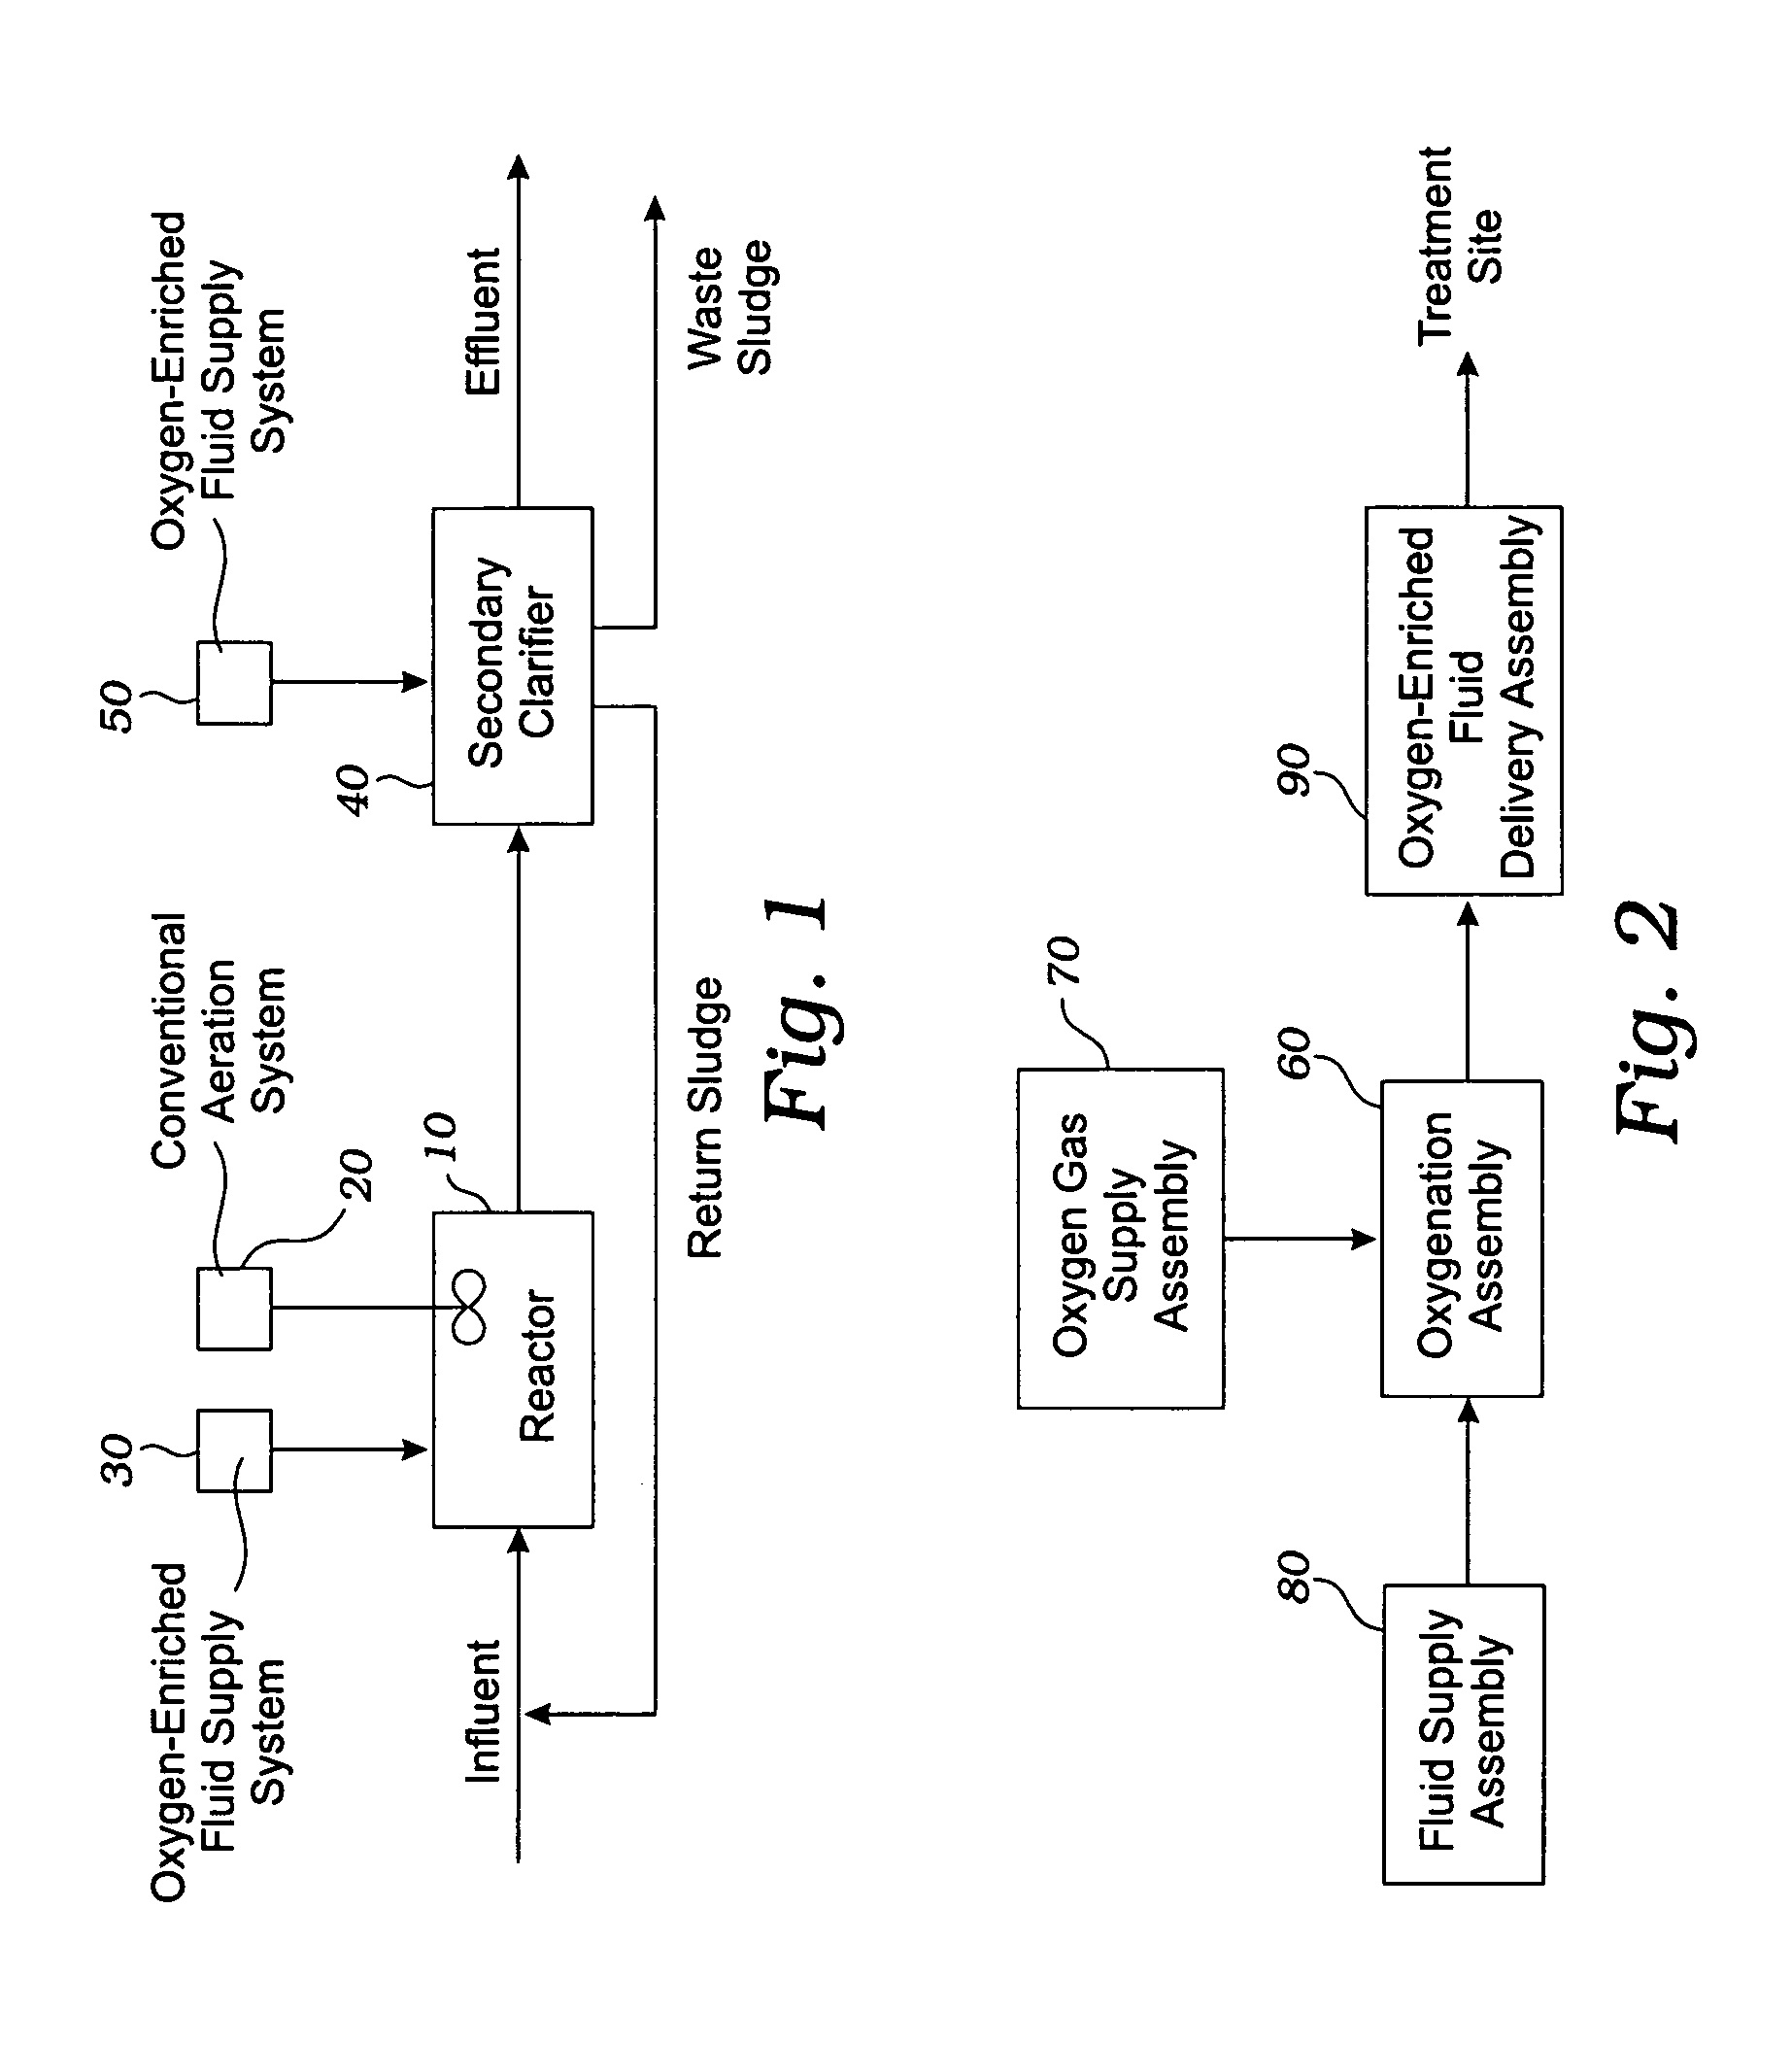 Apparatus for oxygenating wastewater